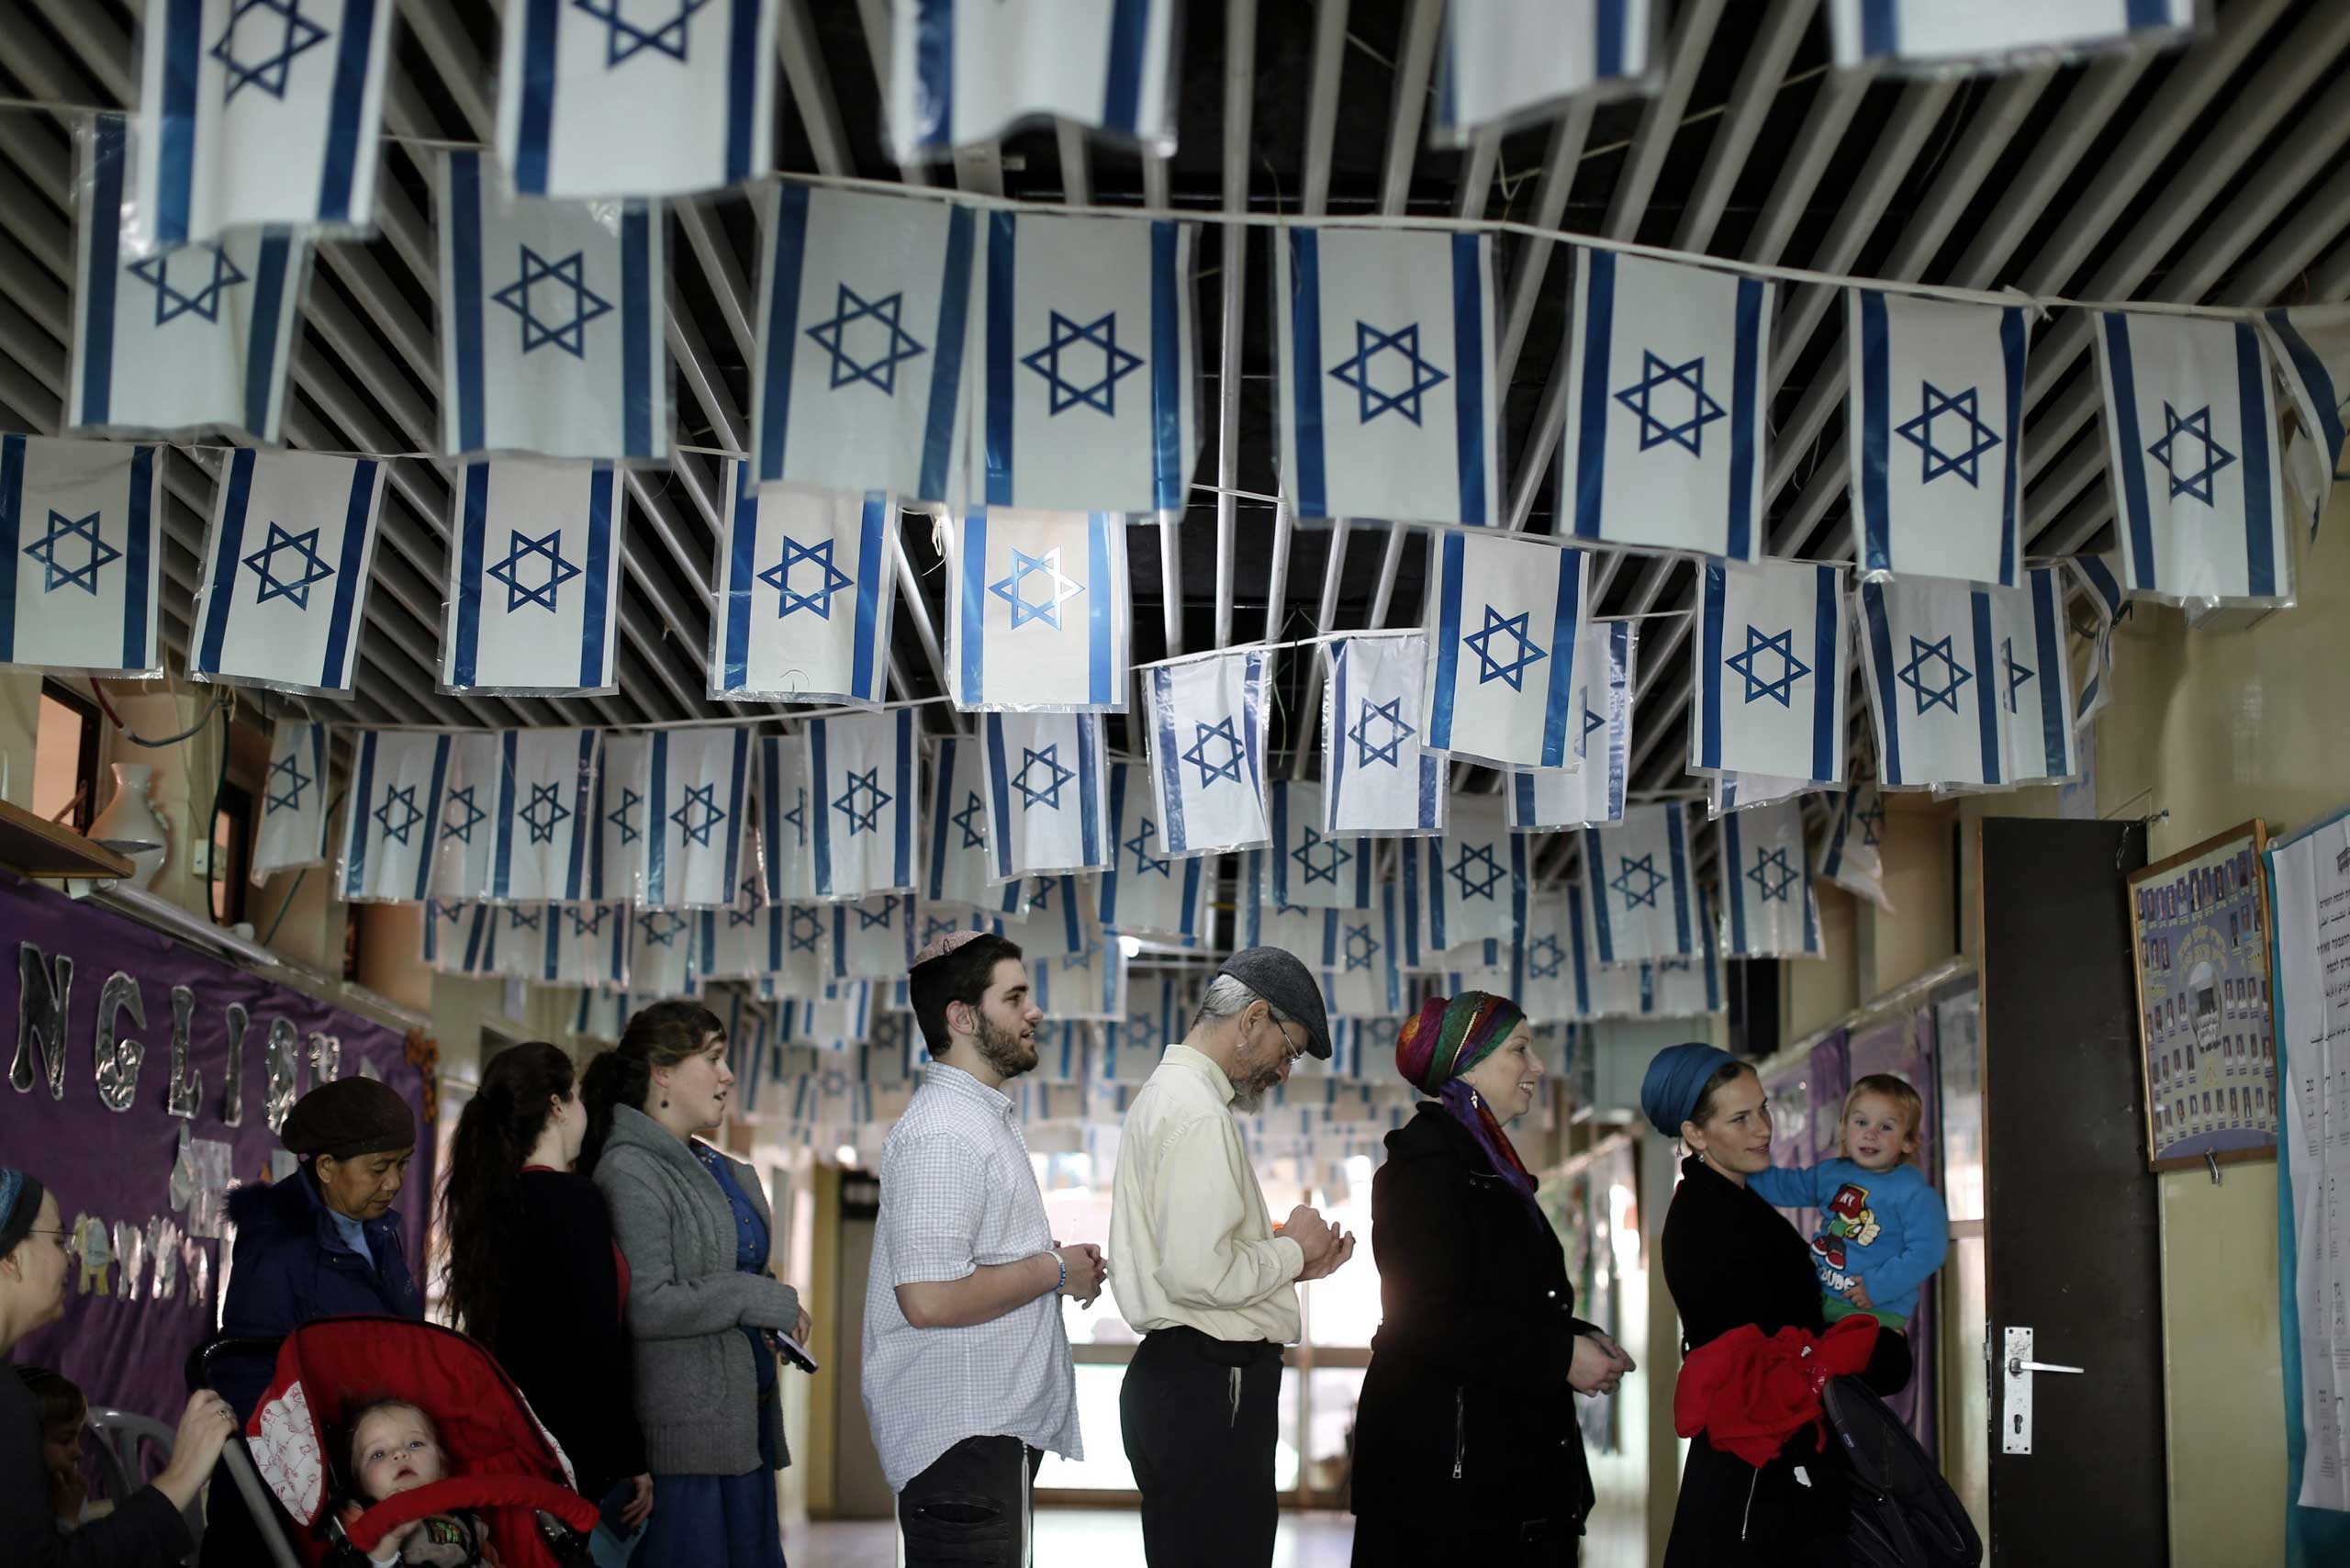 Voters wait in line to vote at a polling station for the Israeli general elections in the West Bank Jewish settlement of Kiryat Arba, near Hebron,March 17, 2015.